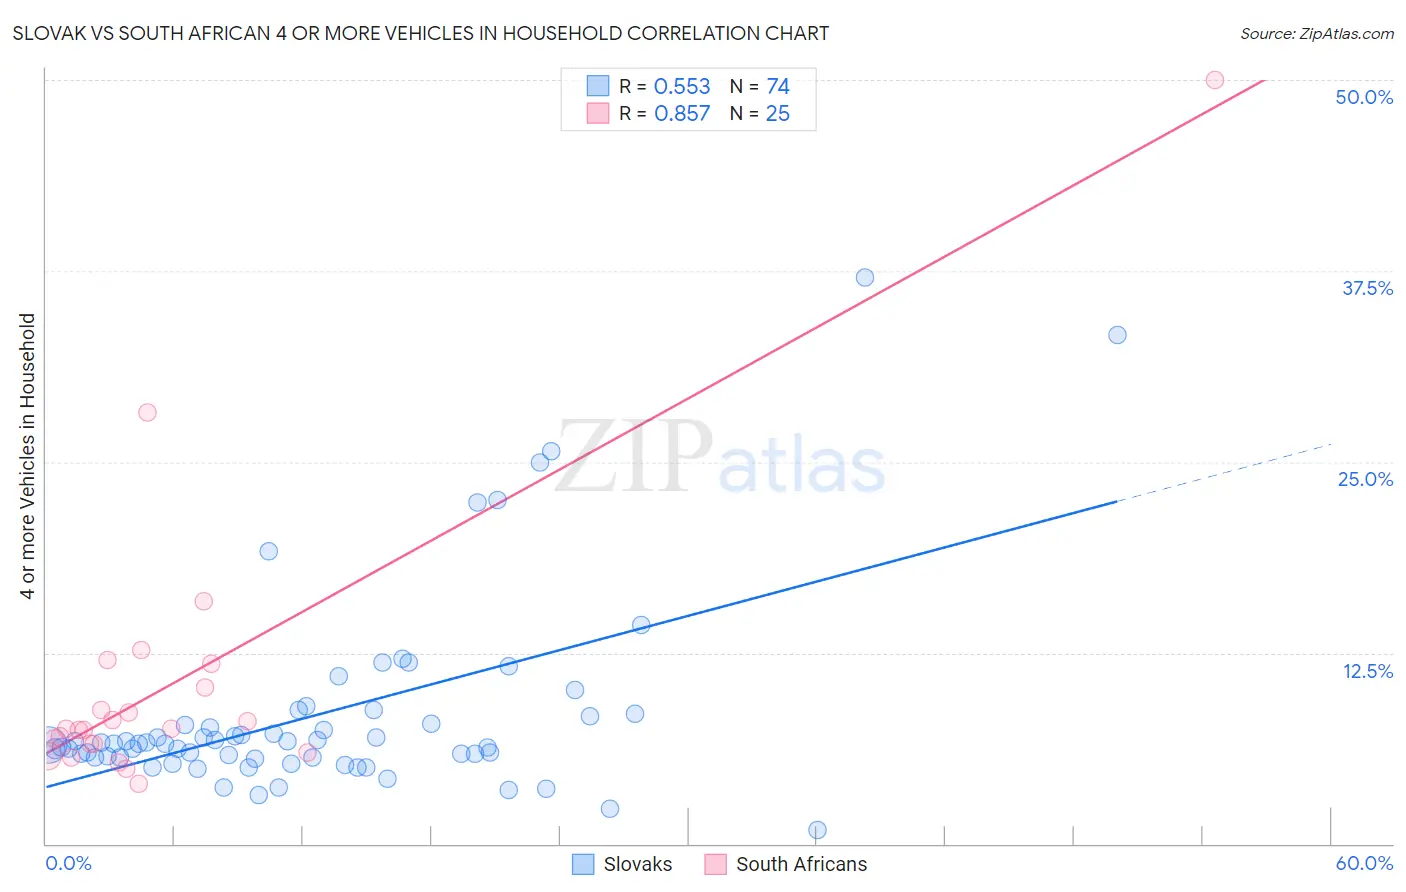 Slovak vs South African 4 or more Vehicles in Household